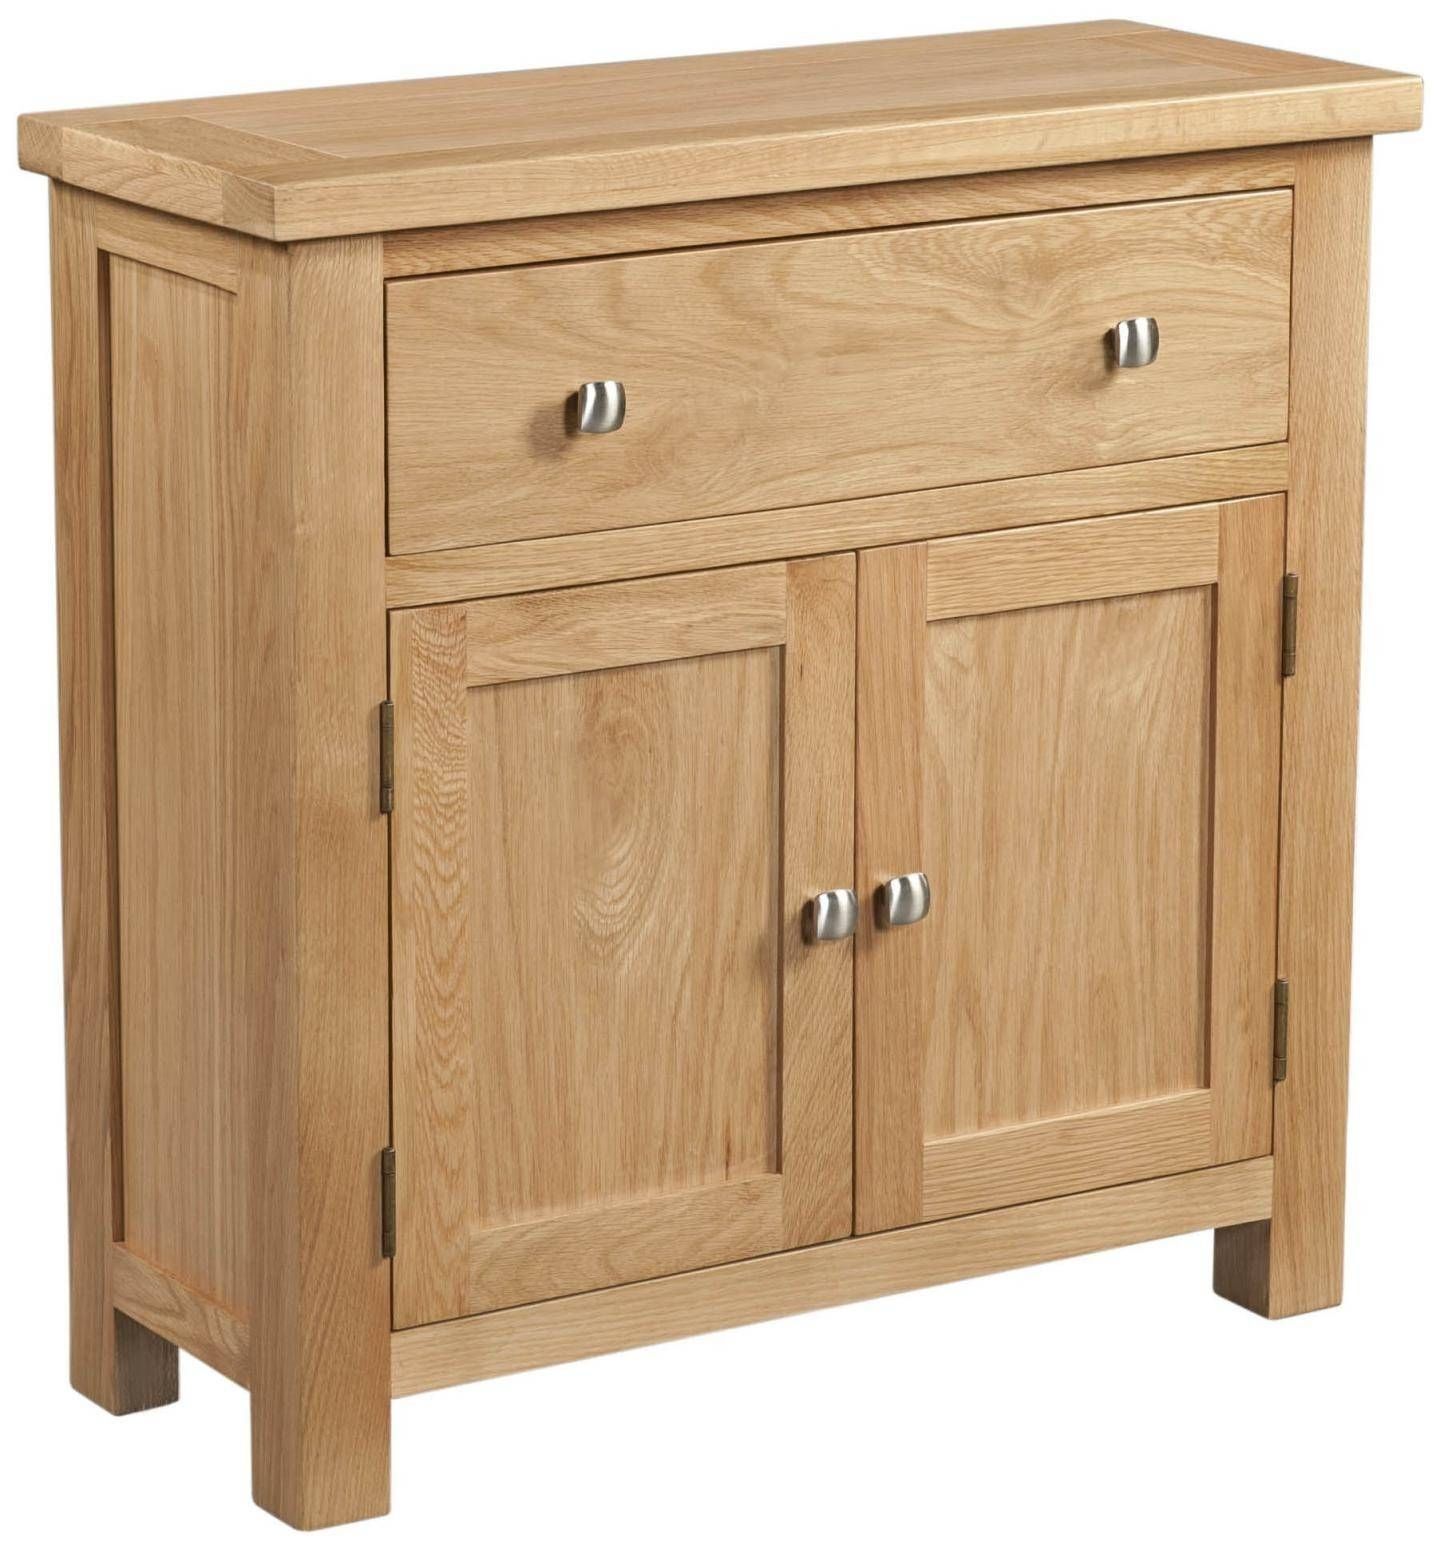 Lovely Pine & Oak Sideboards | Willoby's Furniture Swindon, Wiltshire With Oak Sideboards For Sale (View 8 of 15)